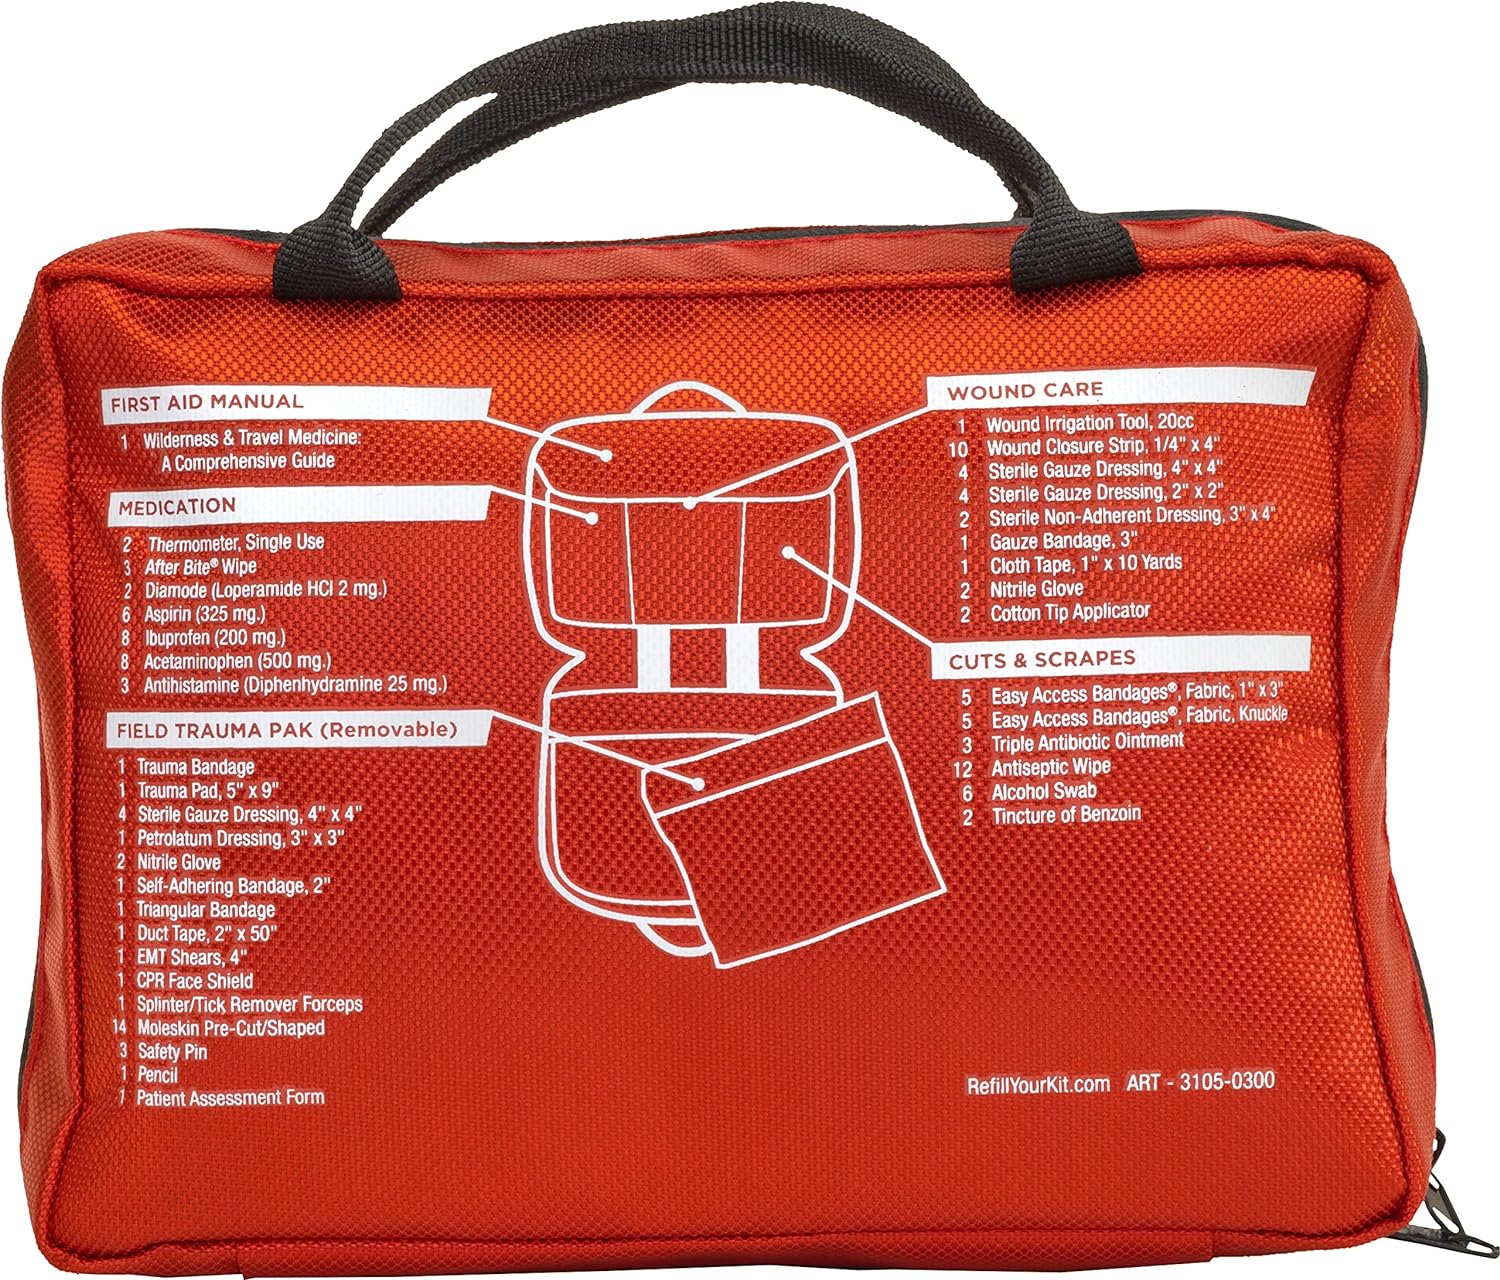 Adventure Medical Kits Sportsman Series 300 First Aid Kit -  Accommodates 6 people for 7 days - Premium Medical Kits from Adventure Medical Kits - Just $89.99! Shop now at Prepared Bee